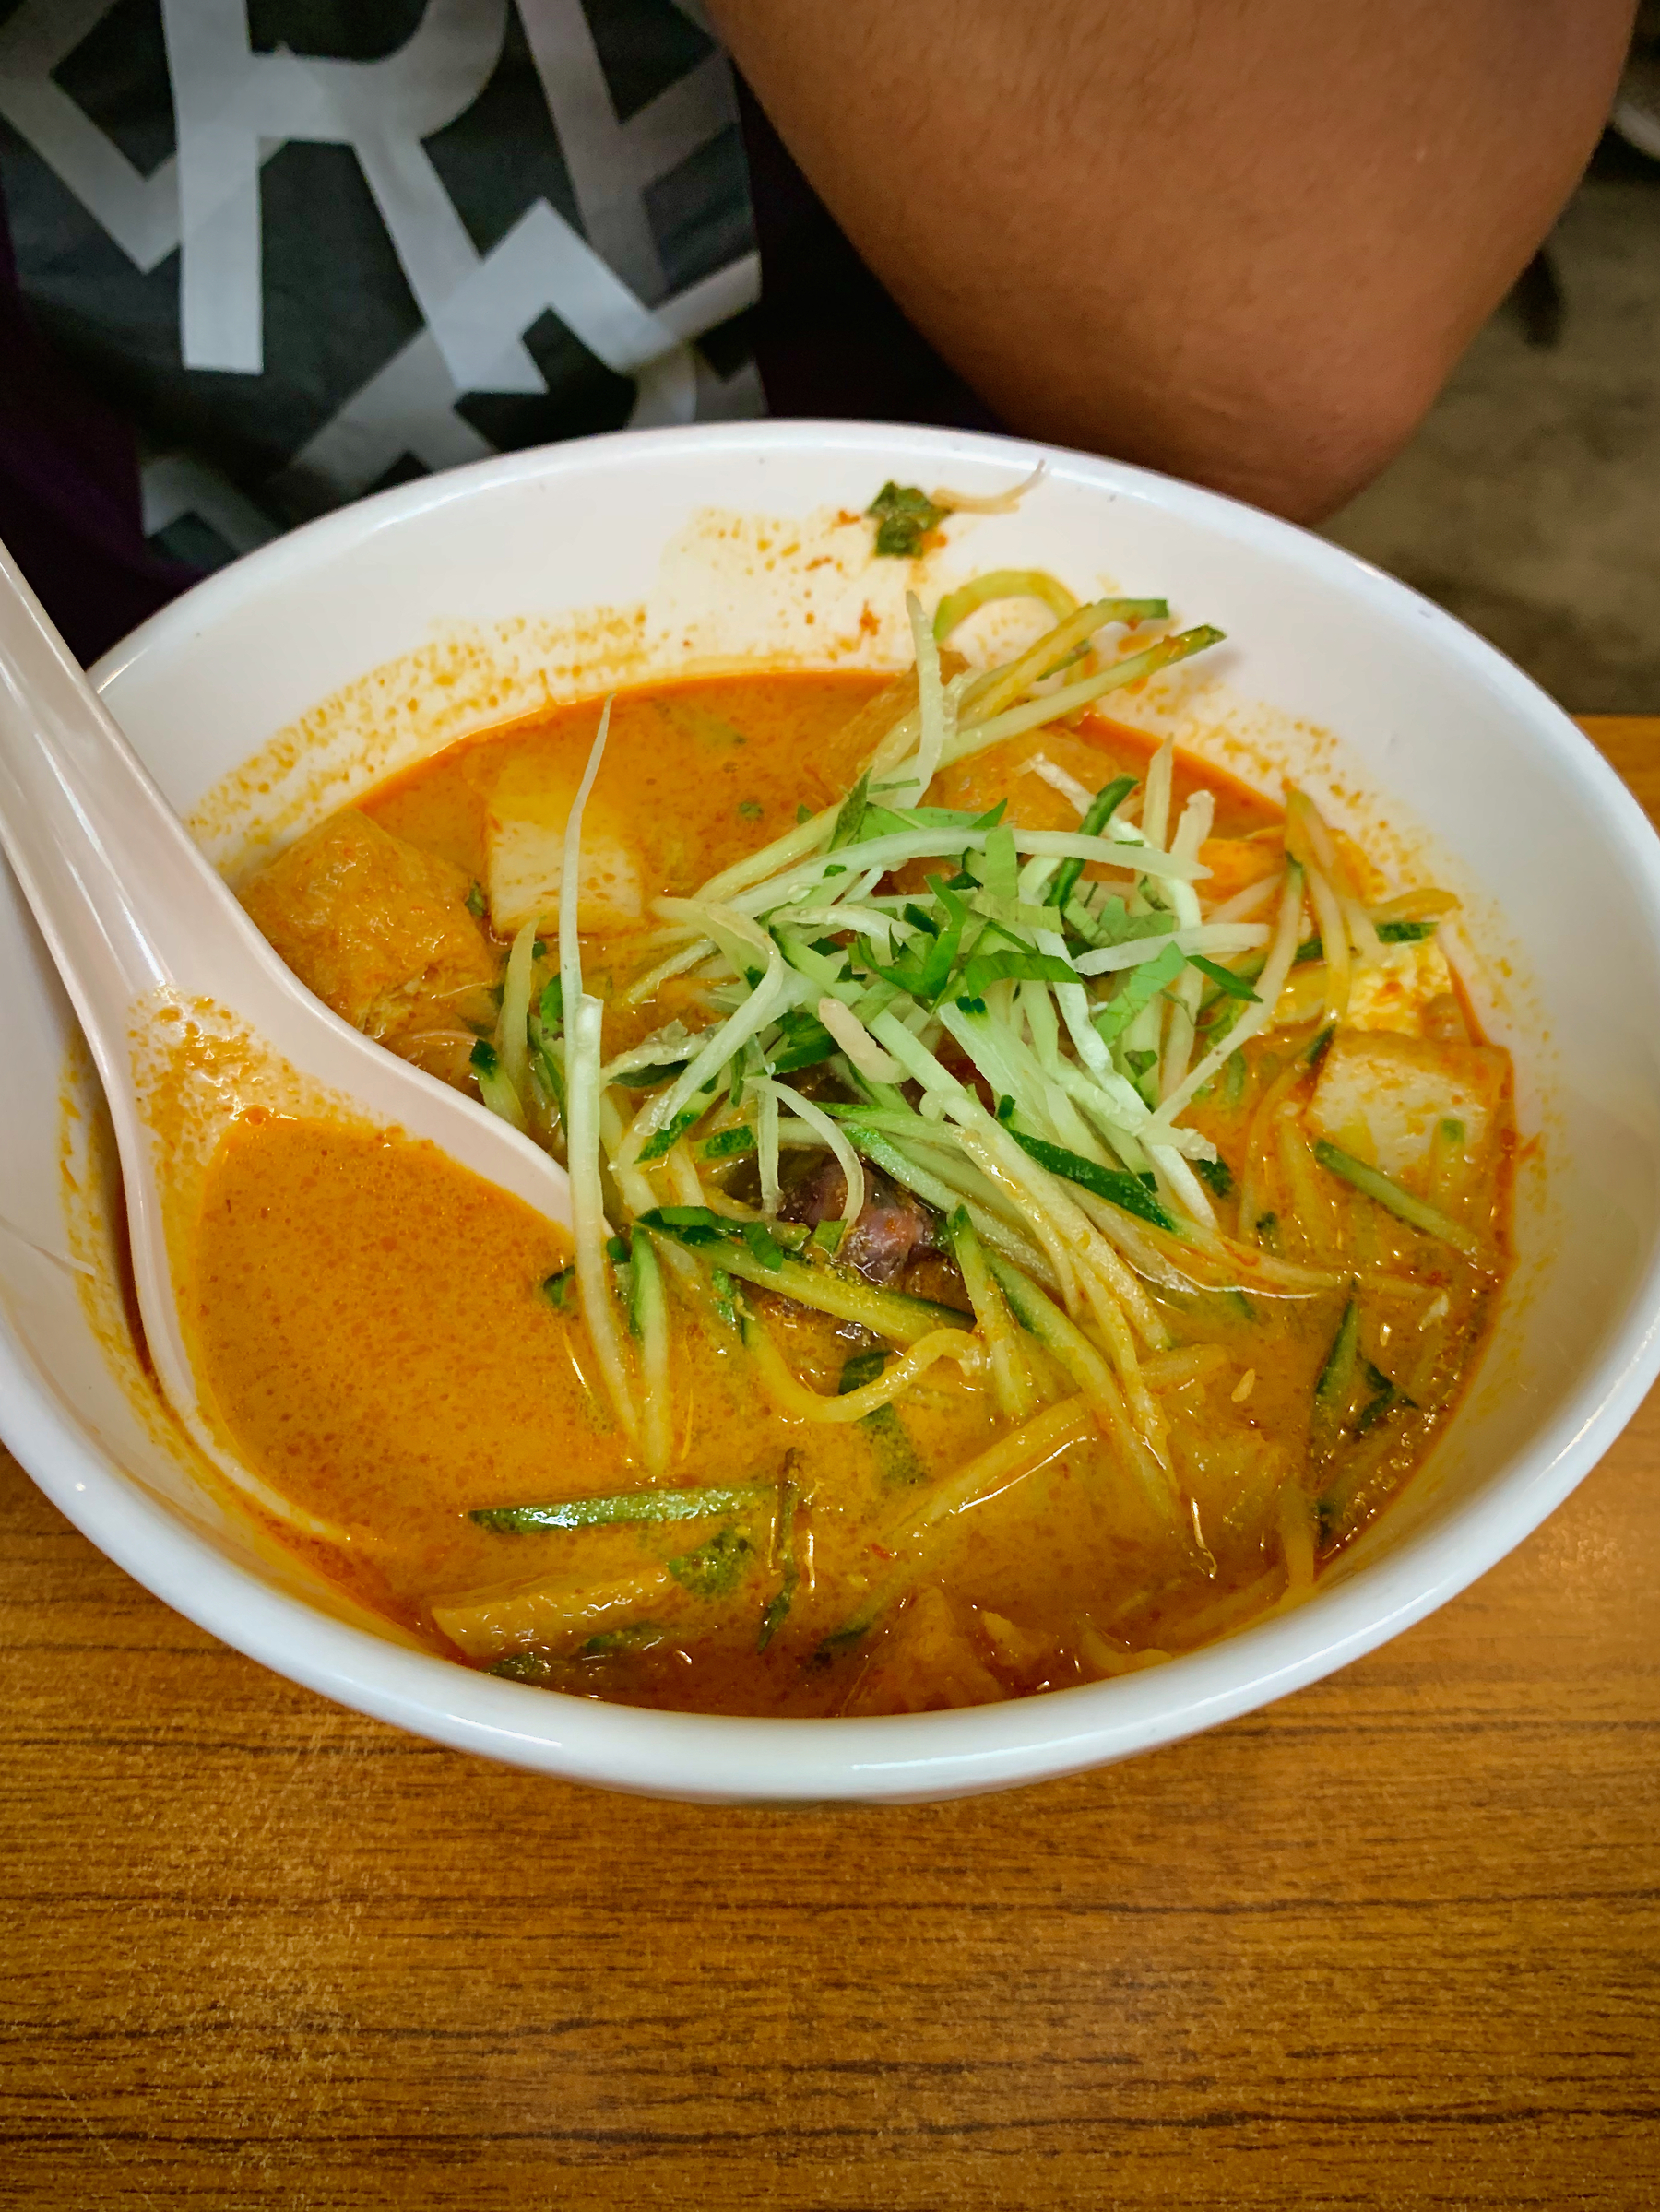 A bowl of Laksa that had rice noodles in a coconut curry gravy with fishball, prawsns, tofu skin, bean sprouts, etc.